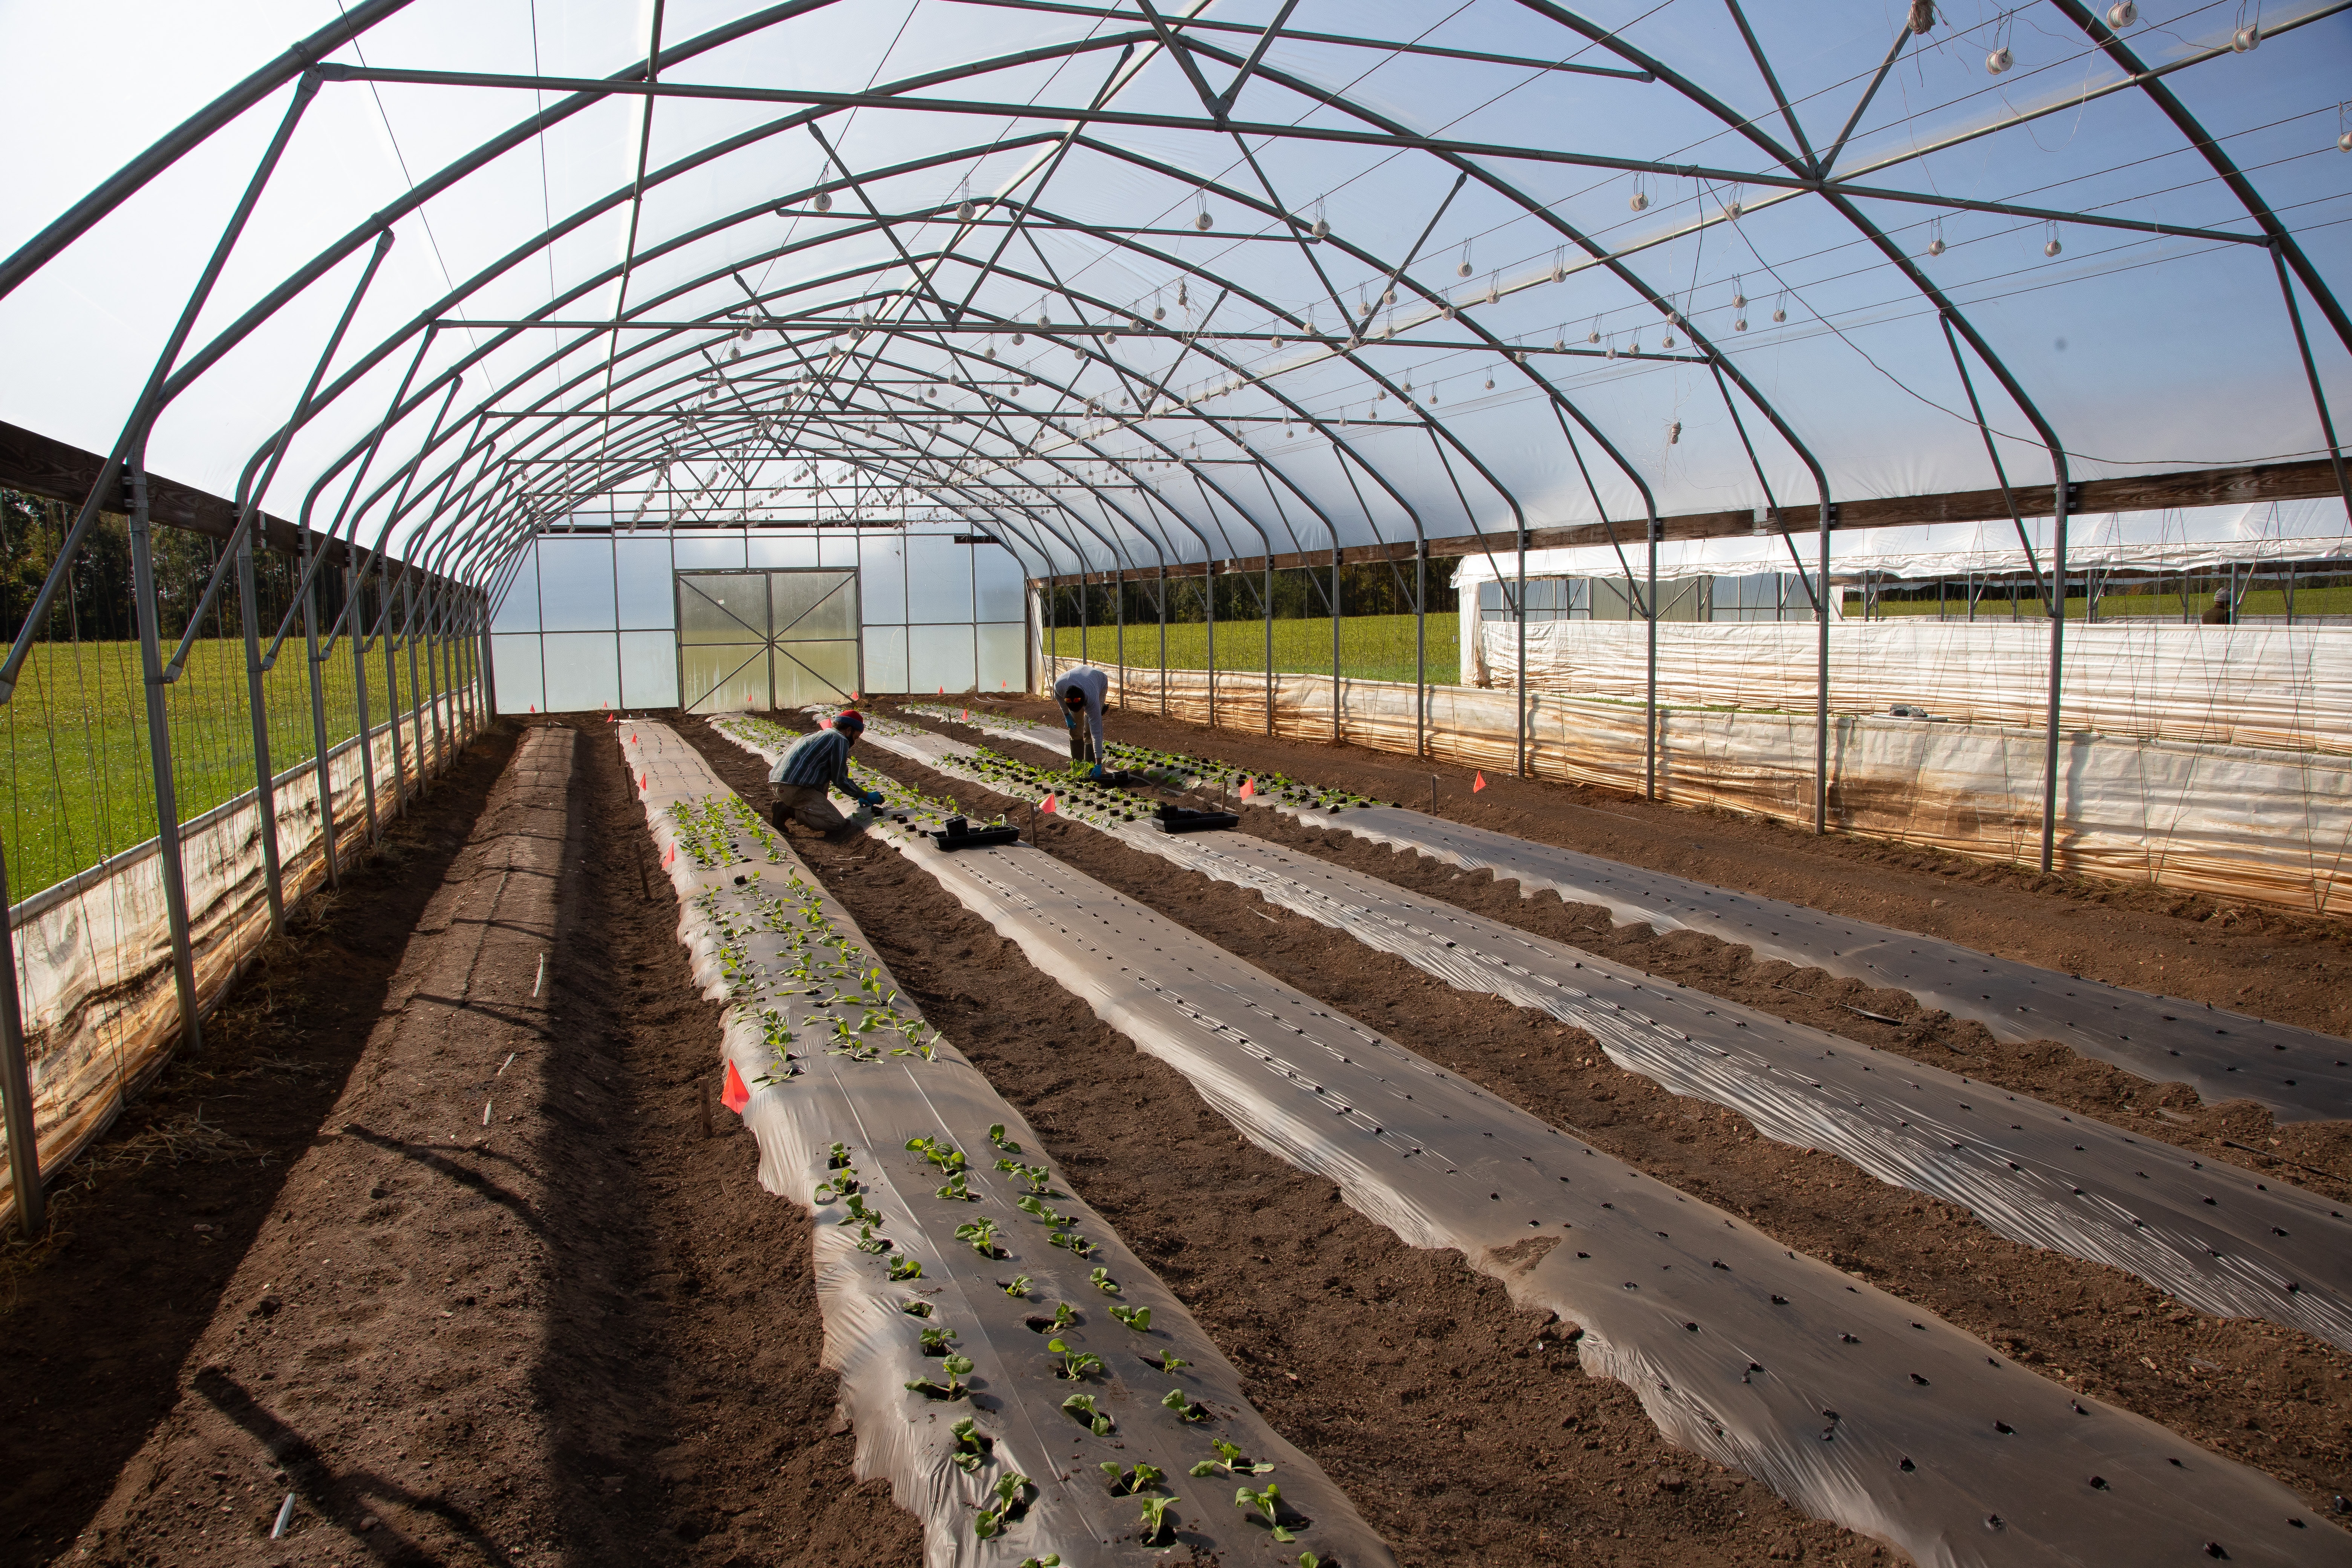 What are the characteristics of greenhouse frame structure in agricultural cultivation